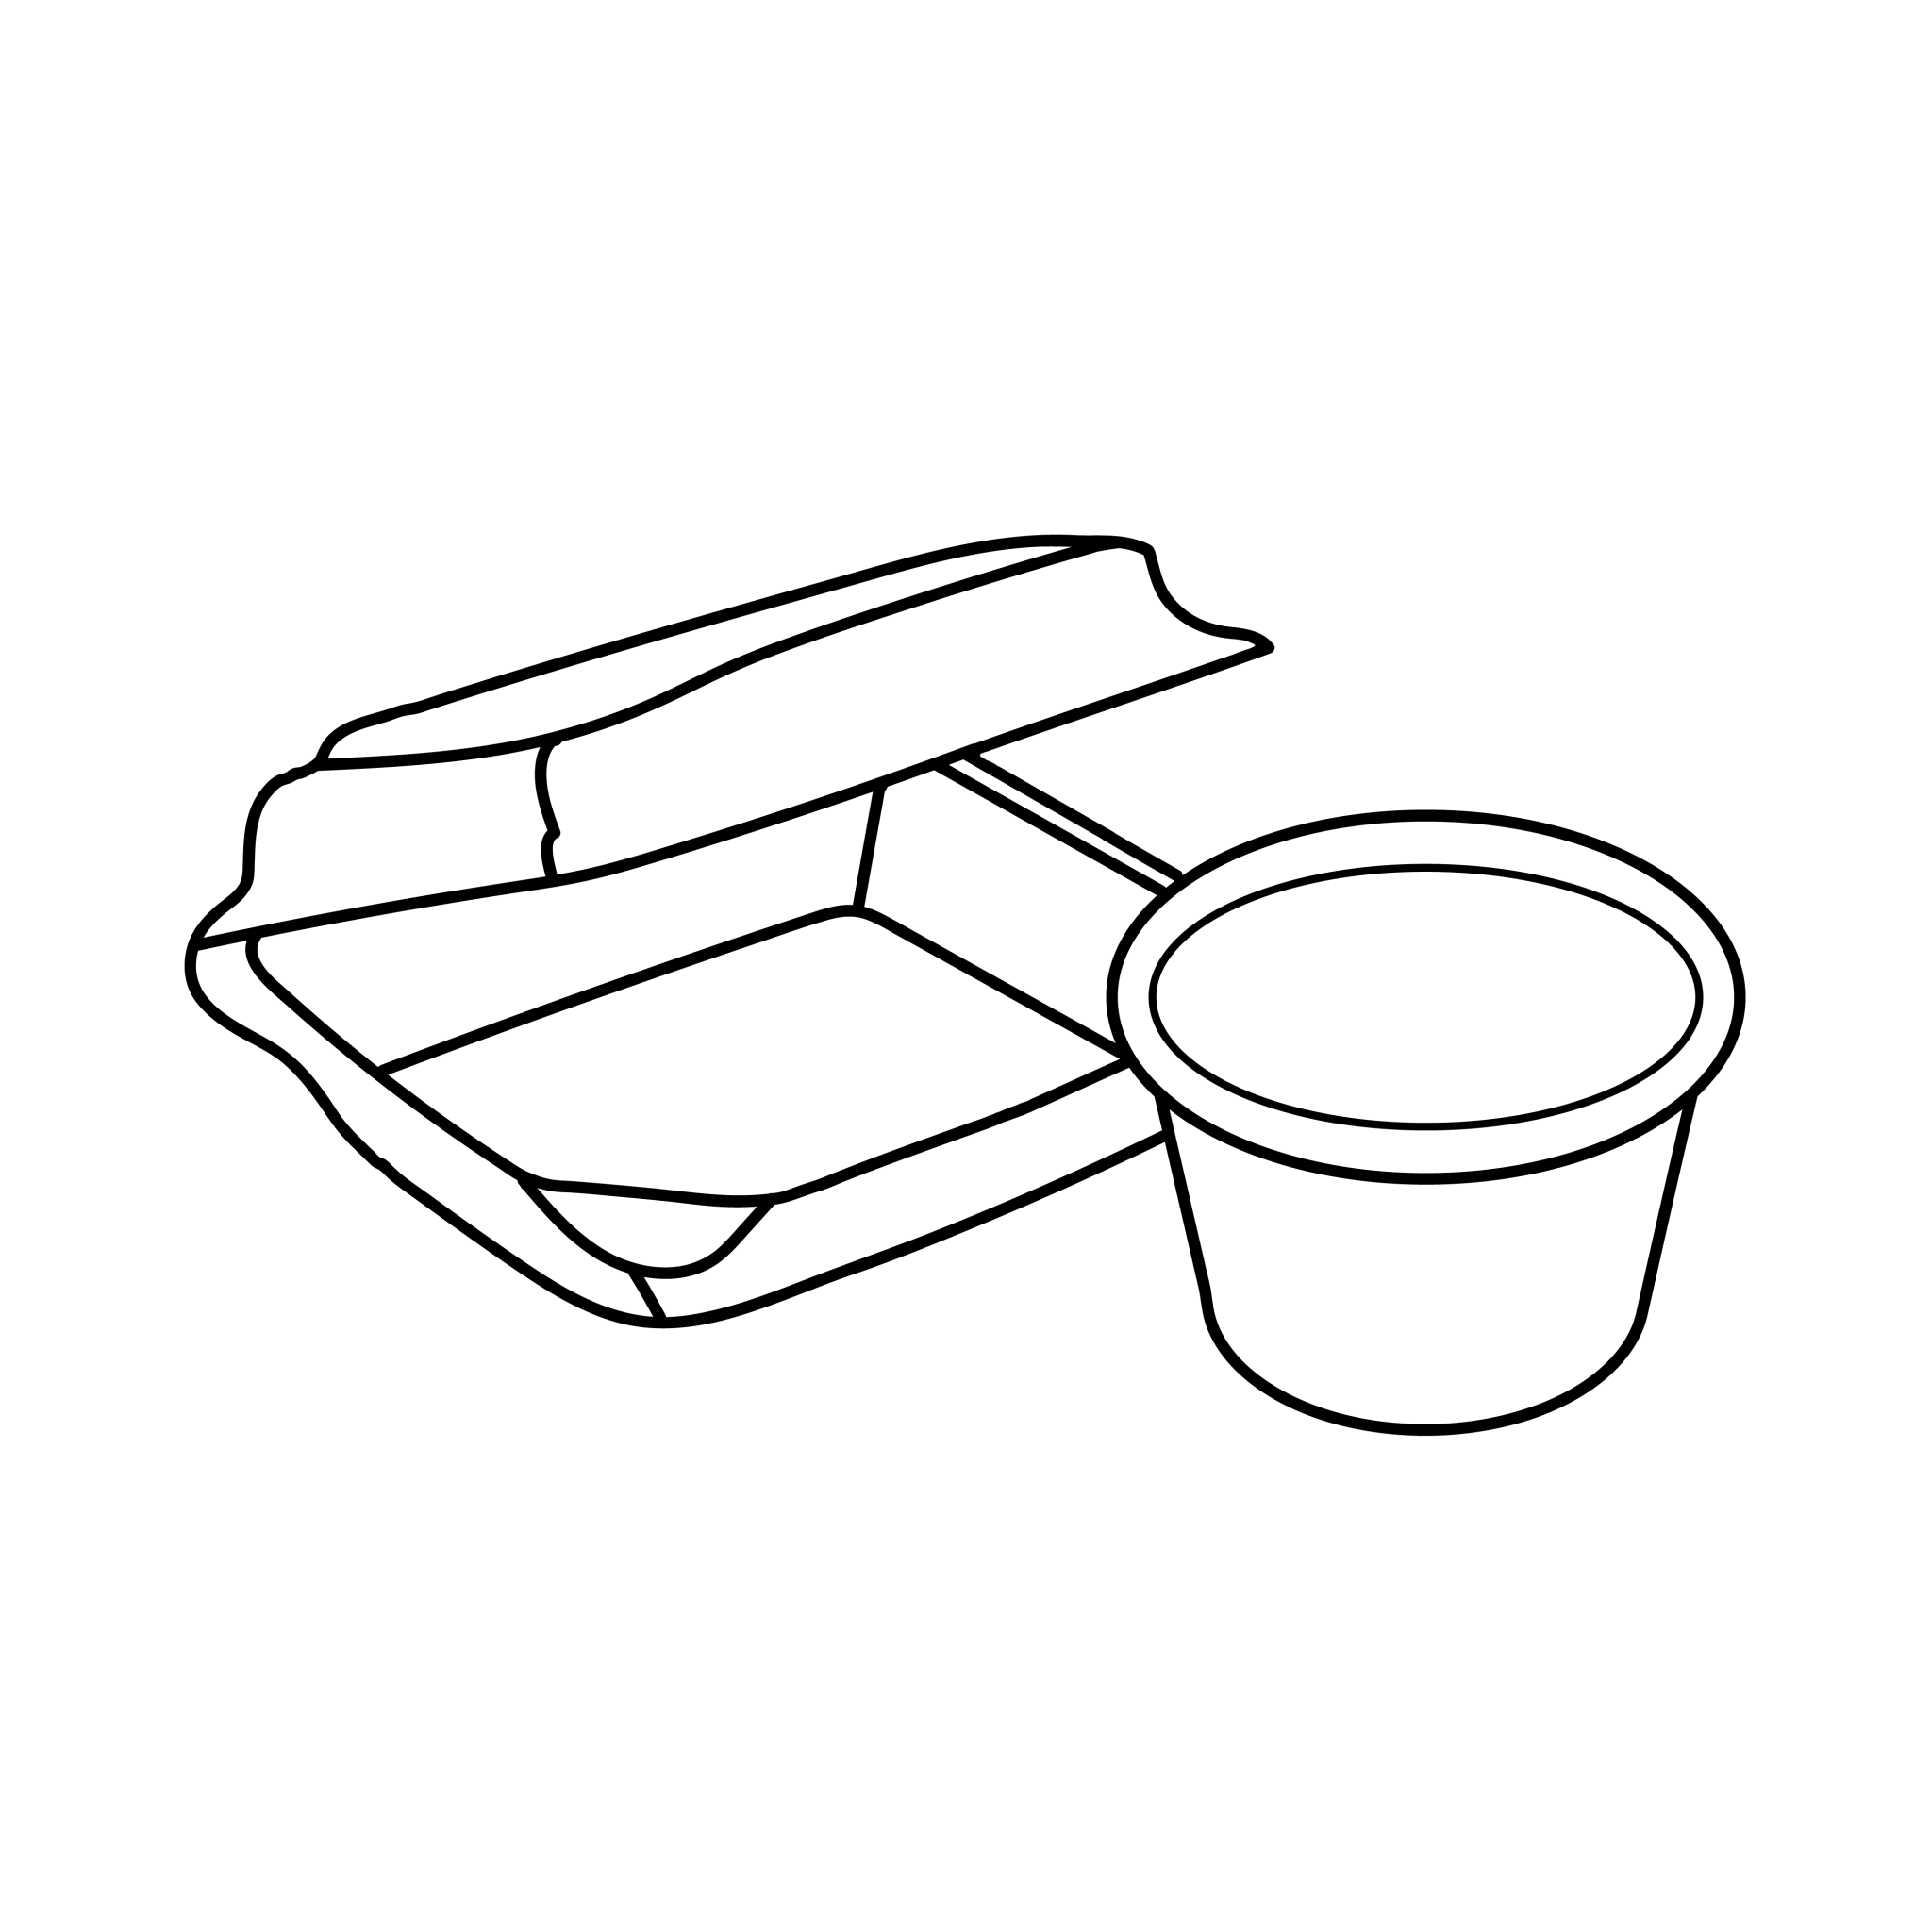 Deli containers - Feast Source